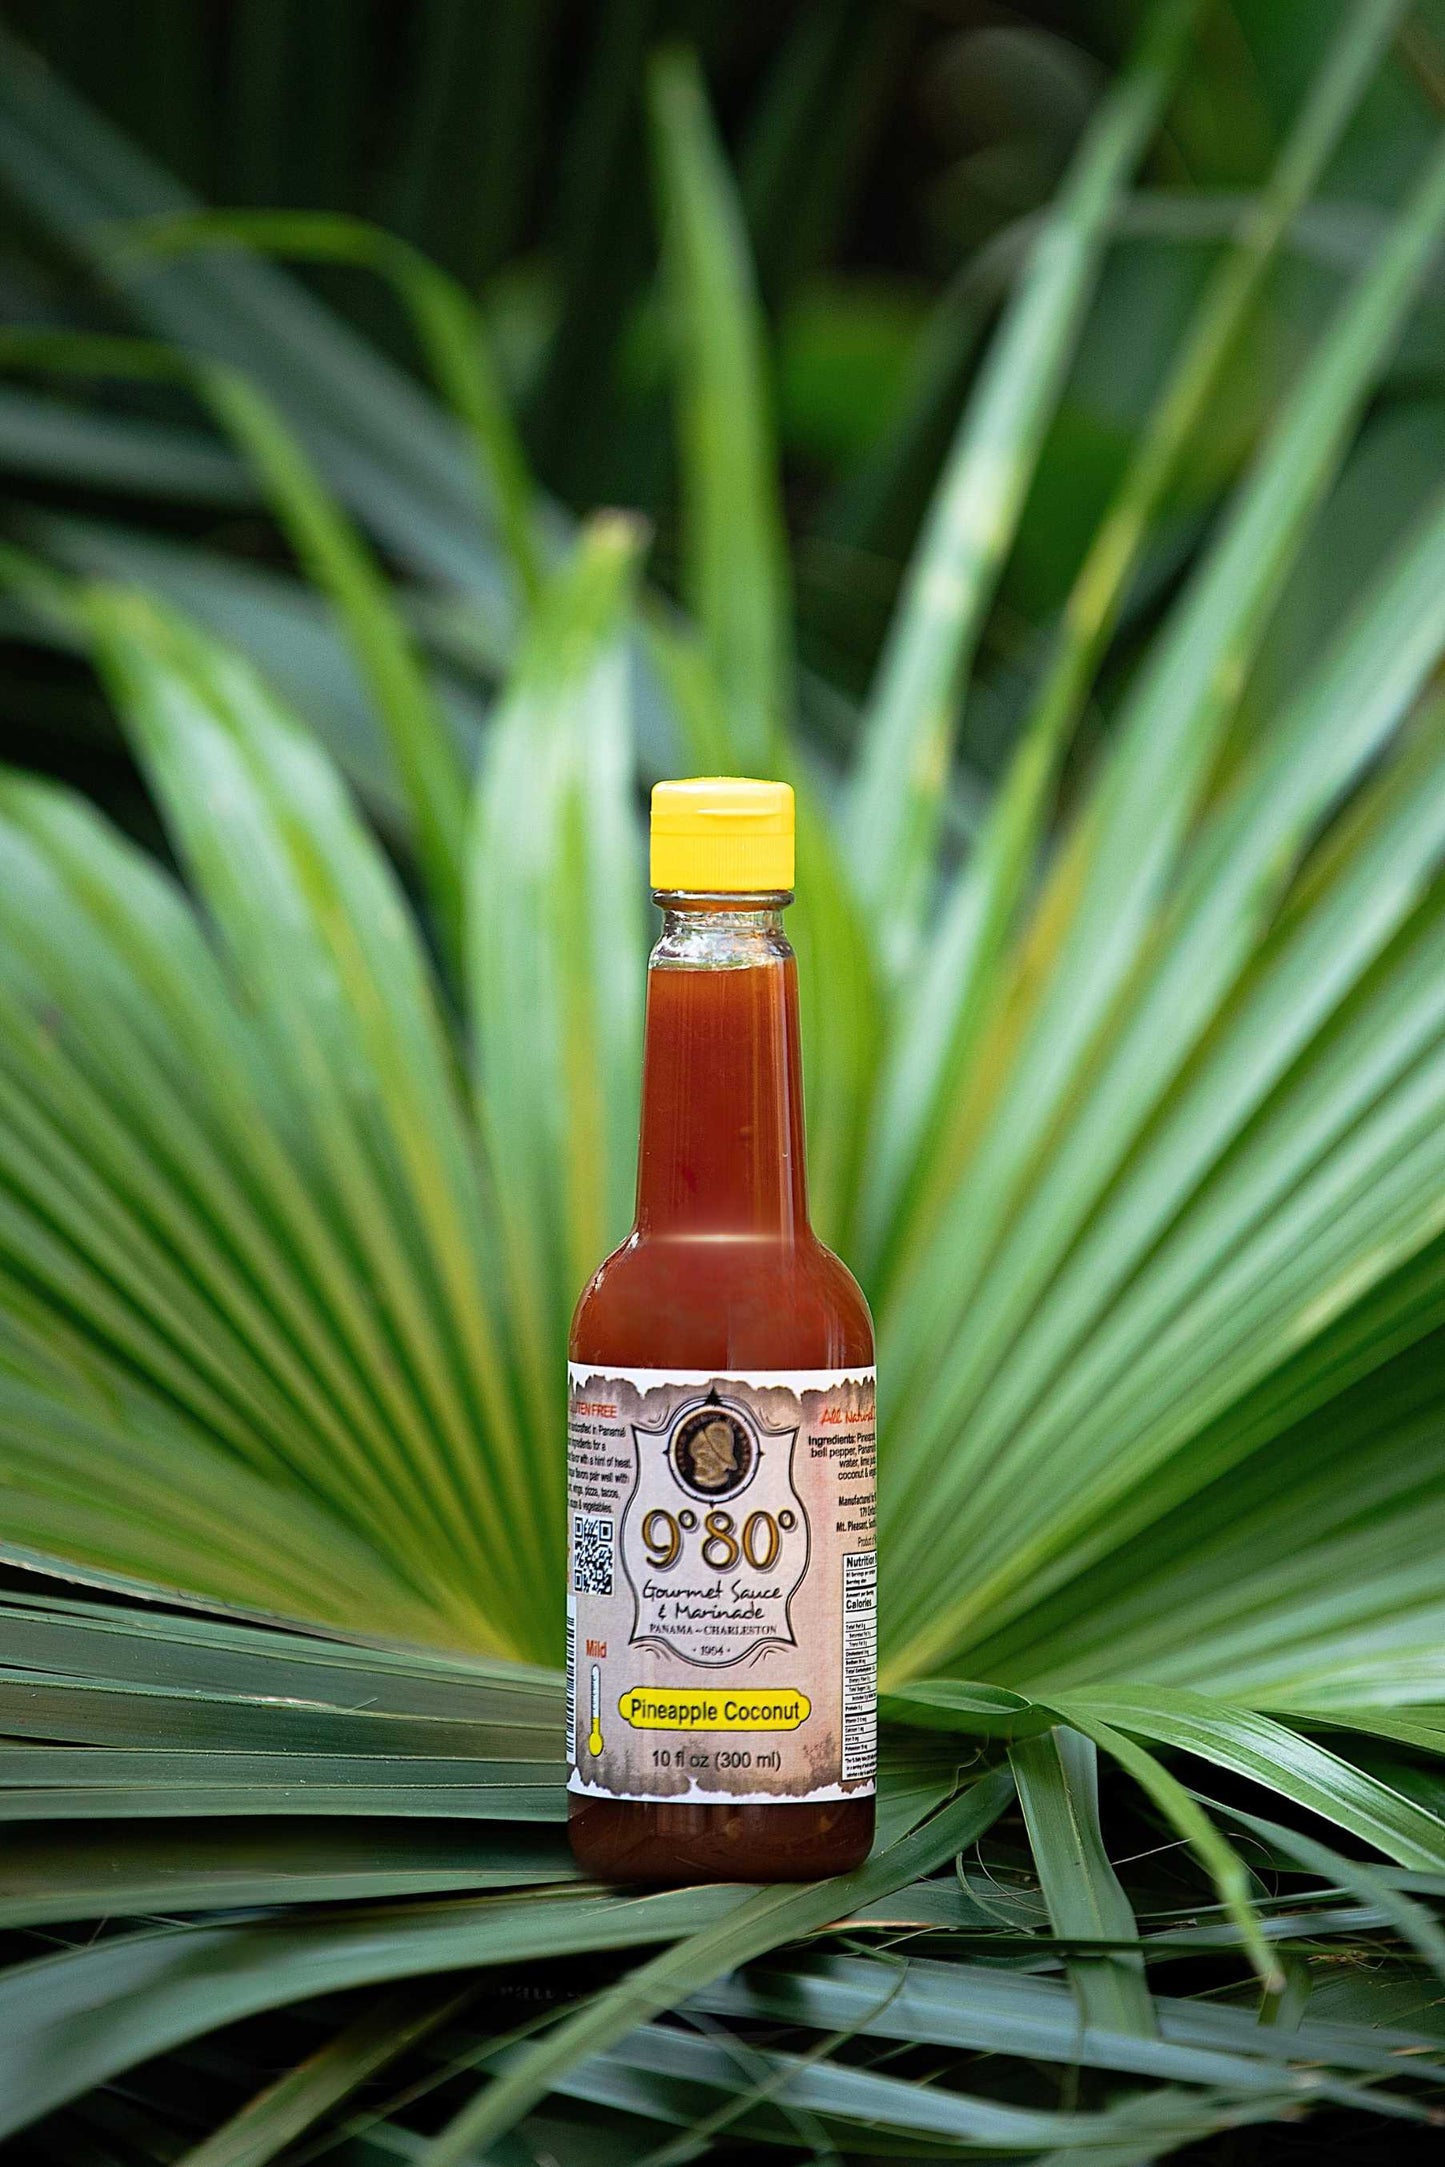 Pineapple Coconut - 9°80° Gourmet Sauces and Marinades